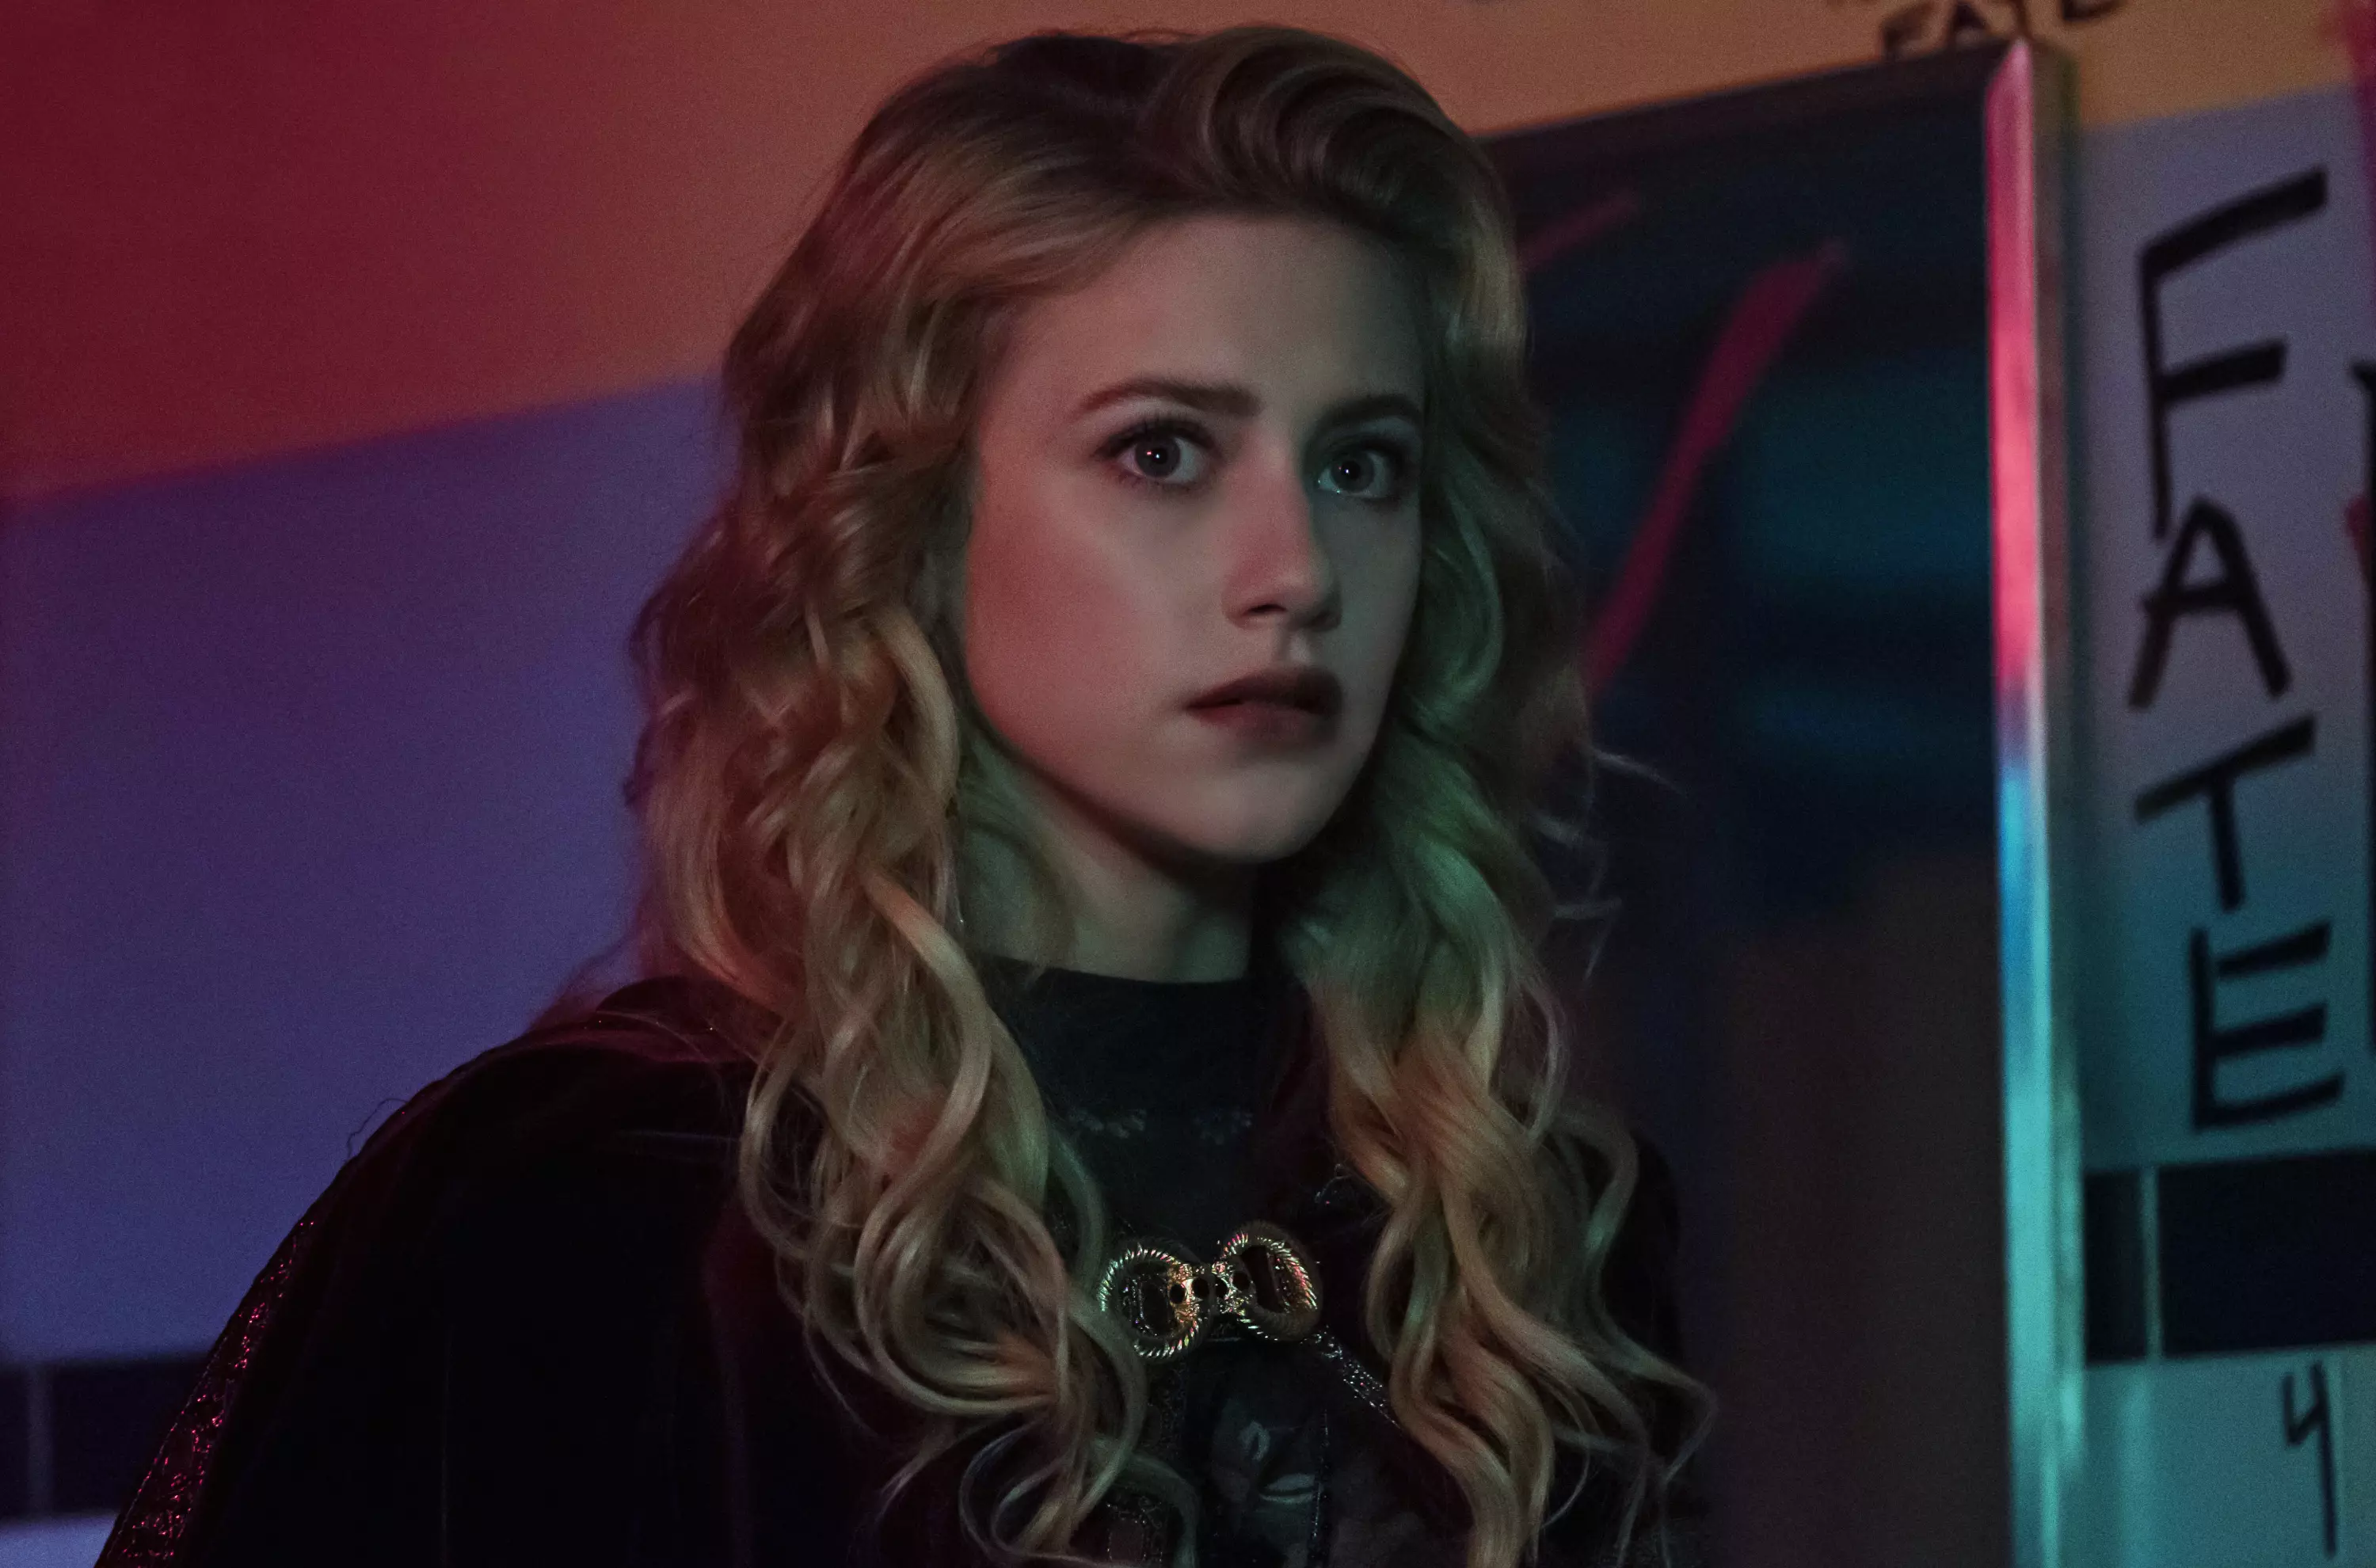 Betty has been discovering more about her dark side and her serial killer gene in season 4 so far (